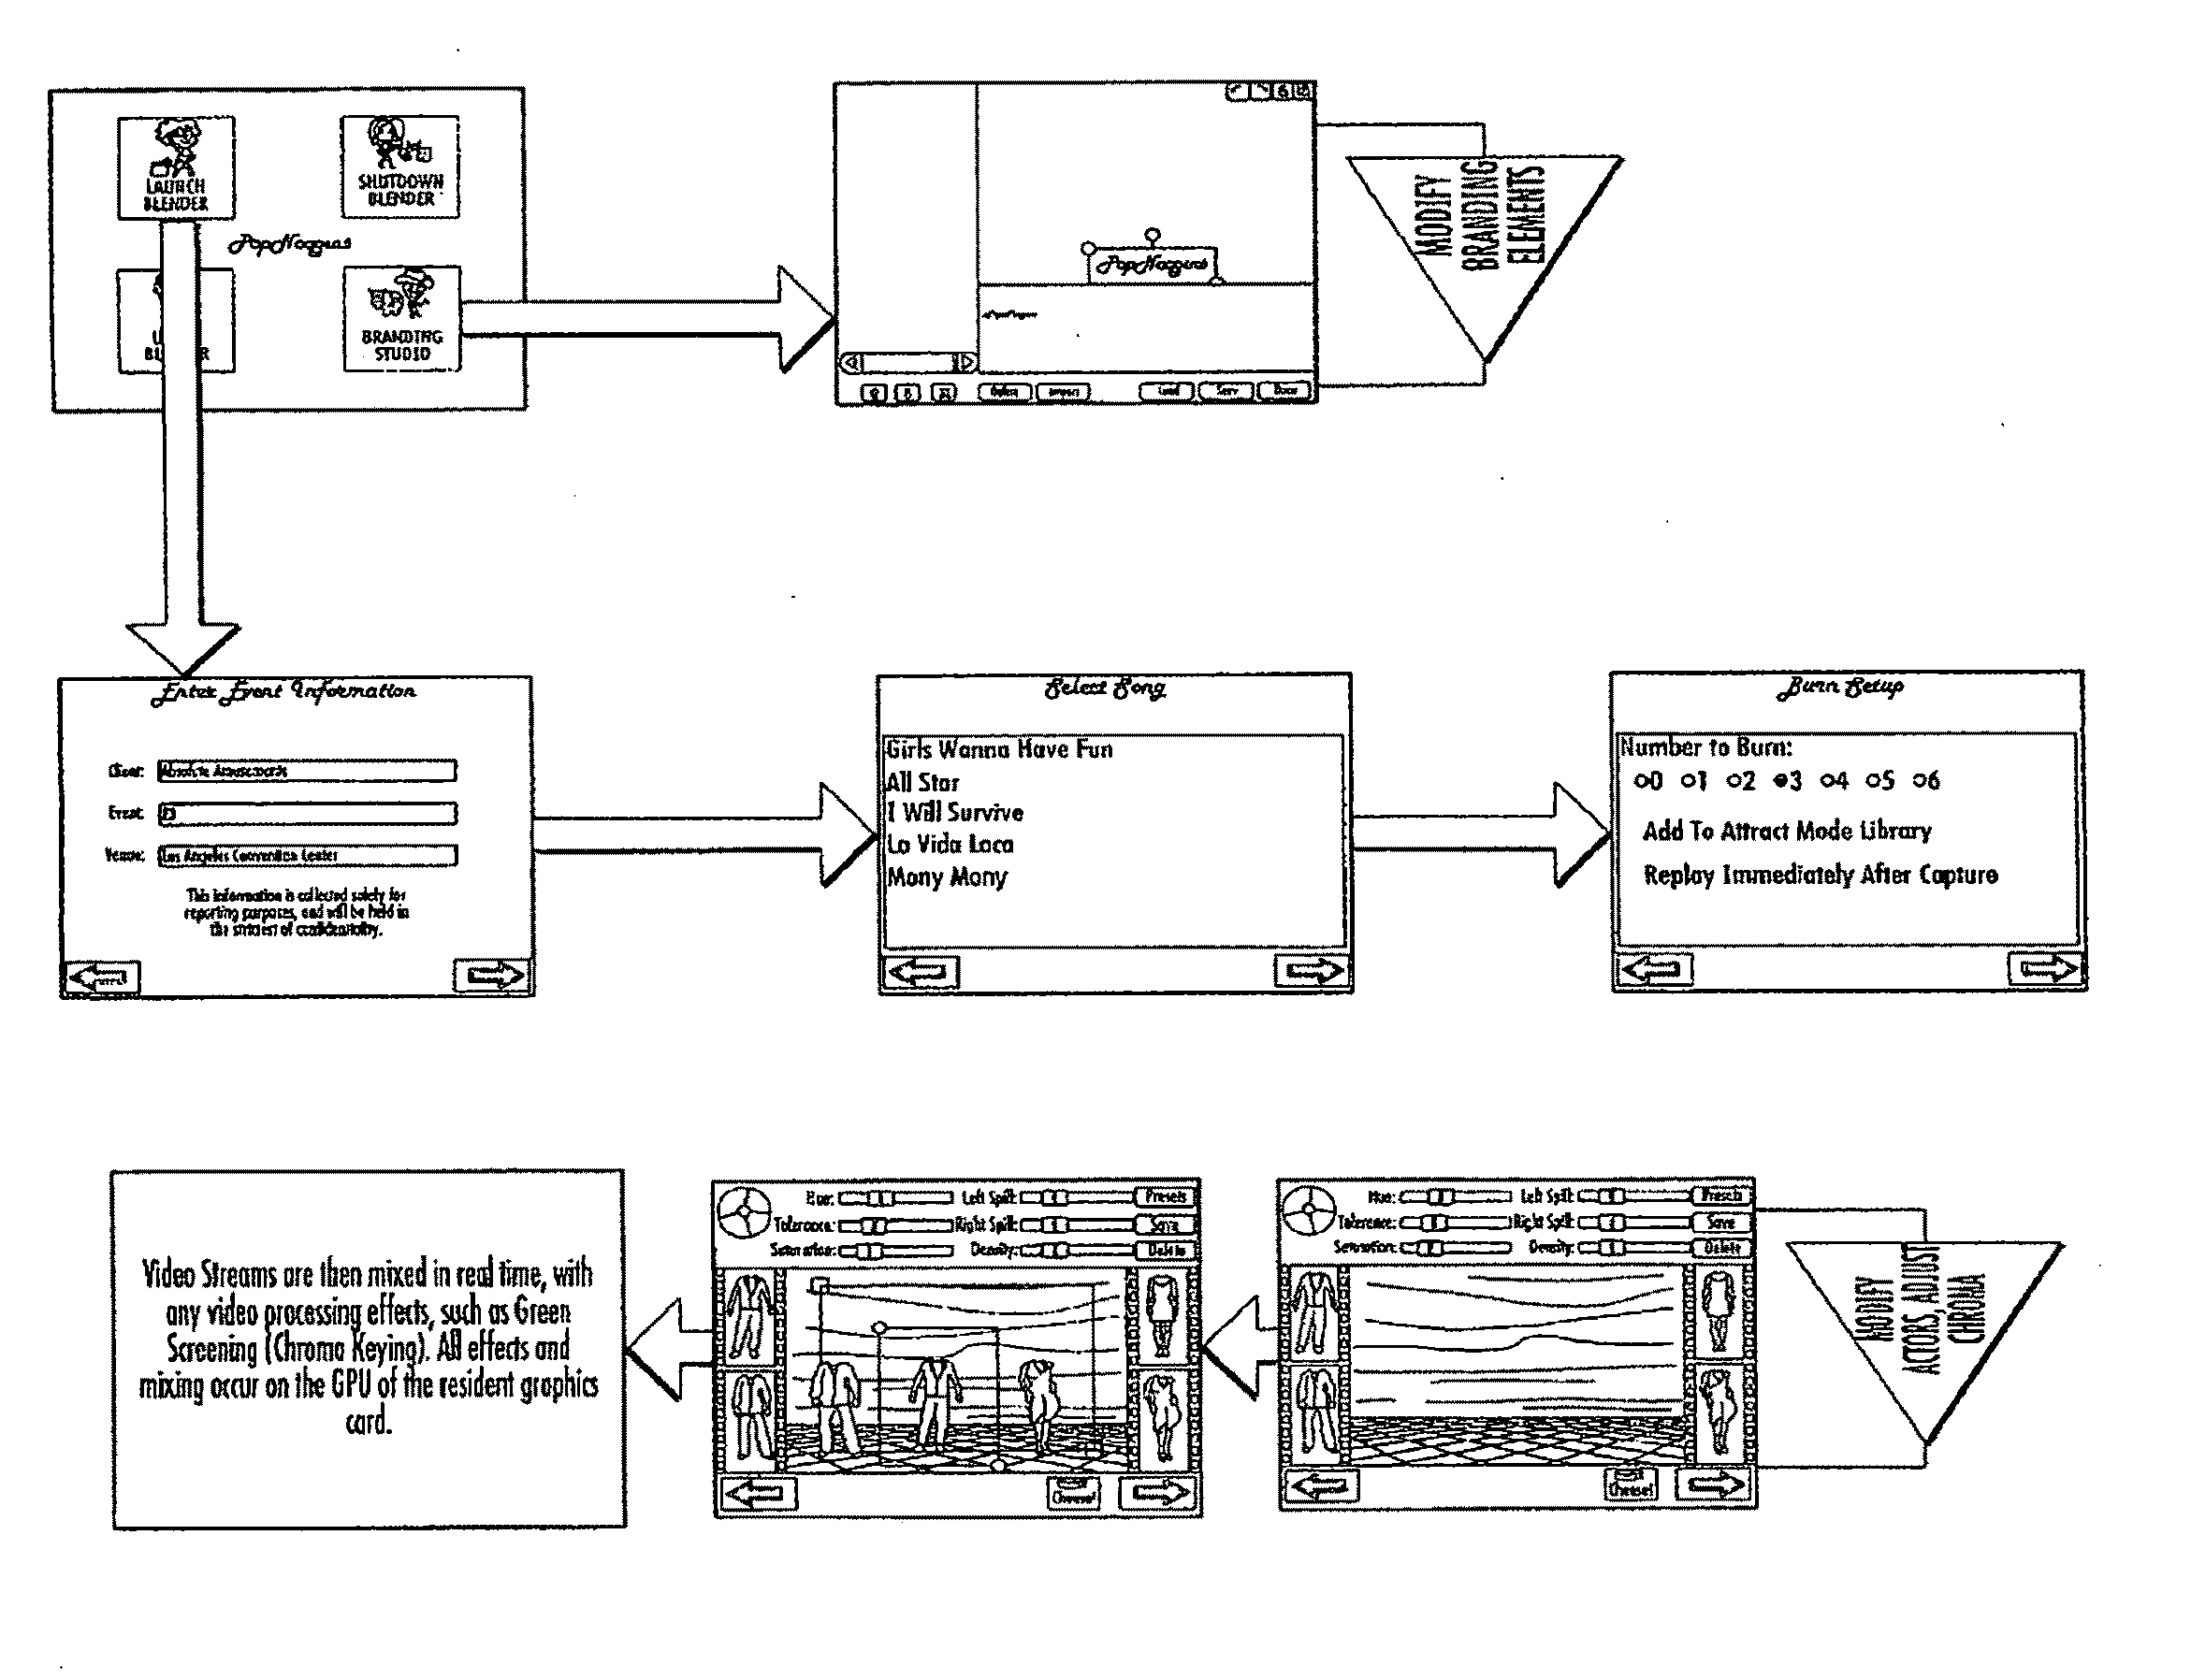 System, apparatus, software and process for integrating video images